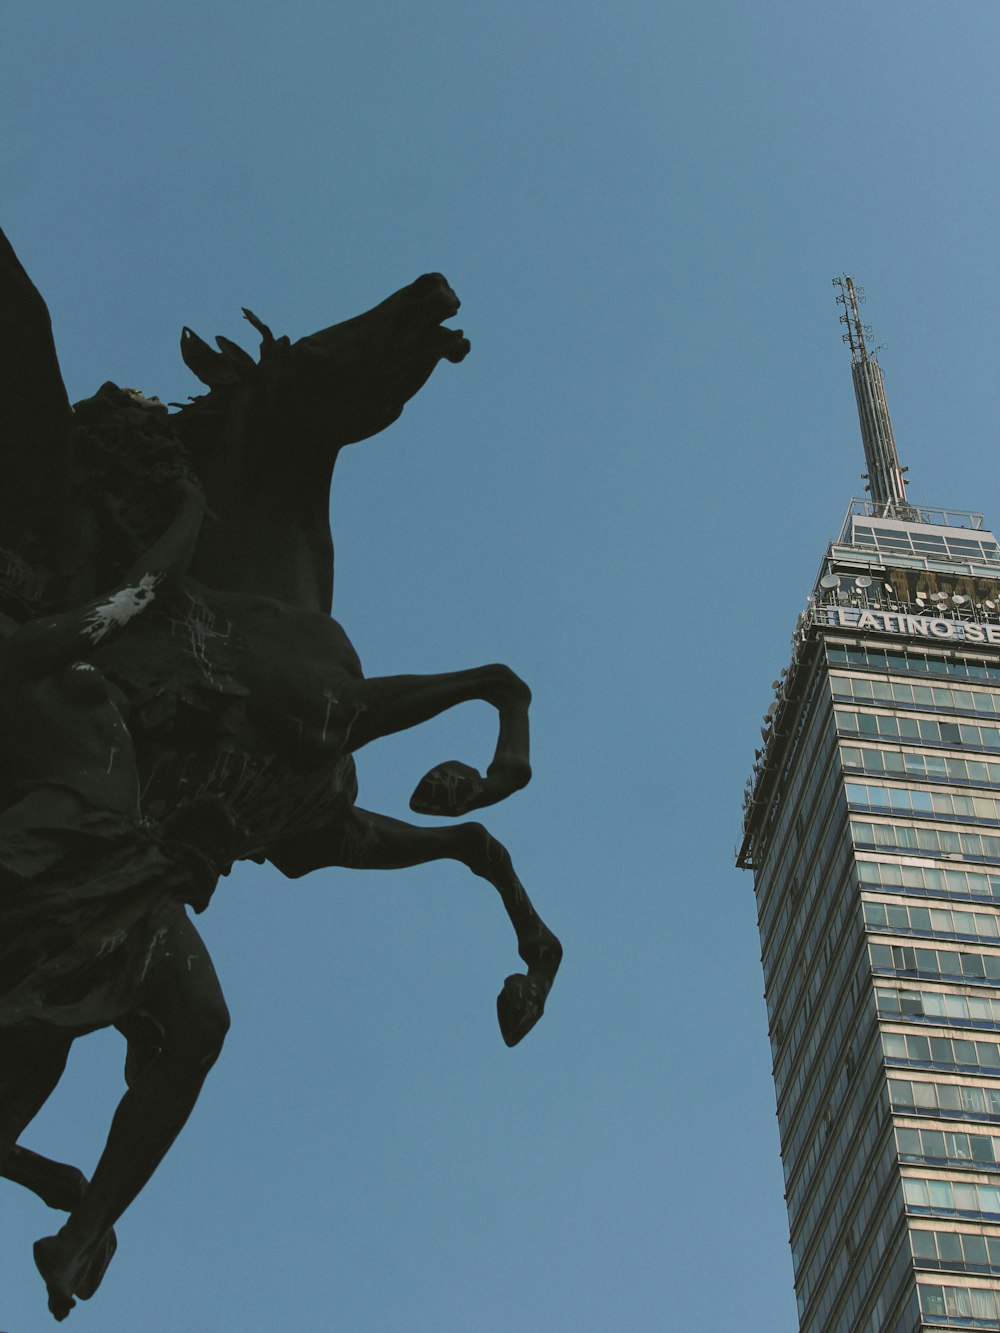 a statue of a man riding a horse next to a tall building